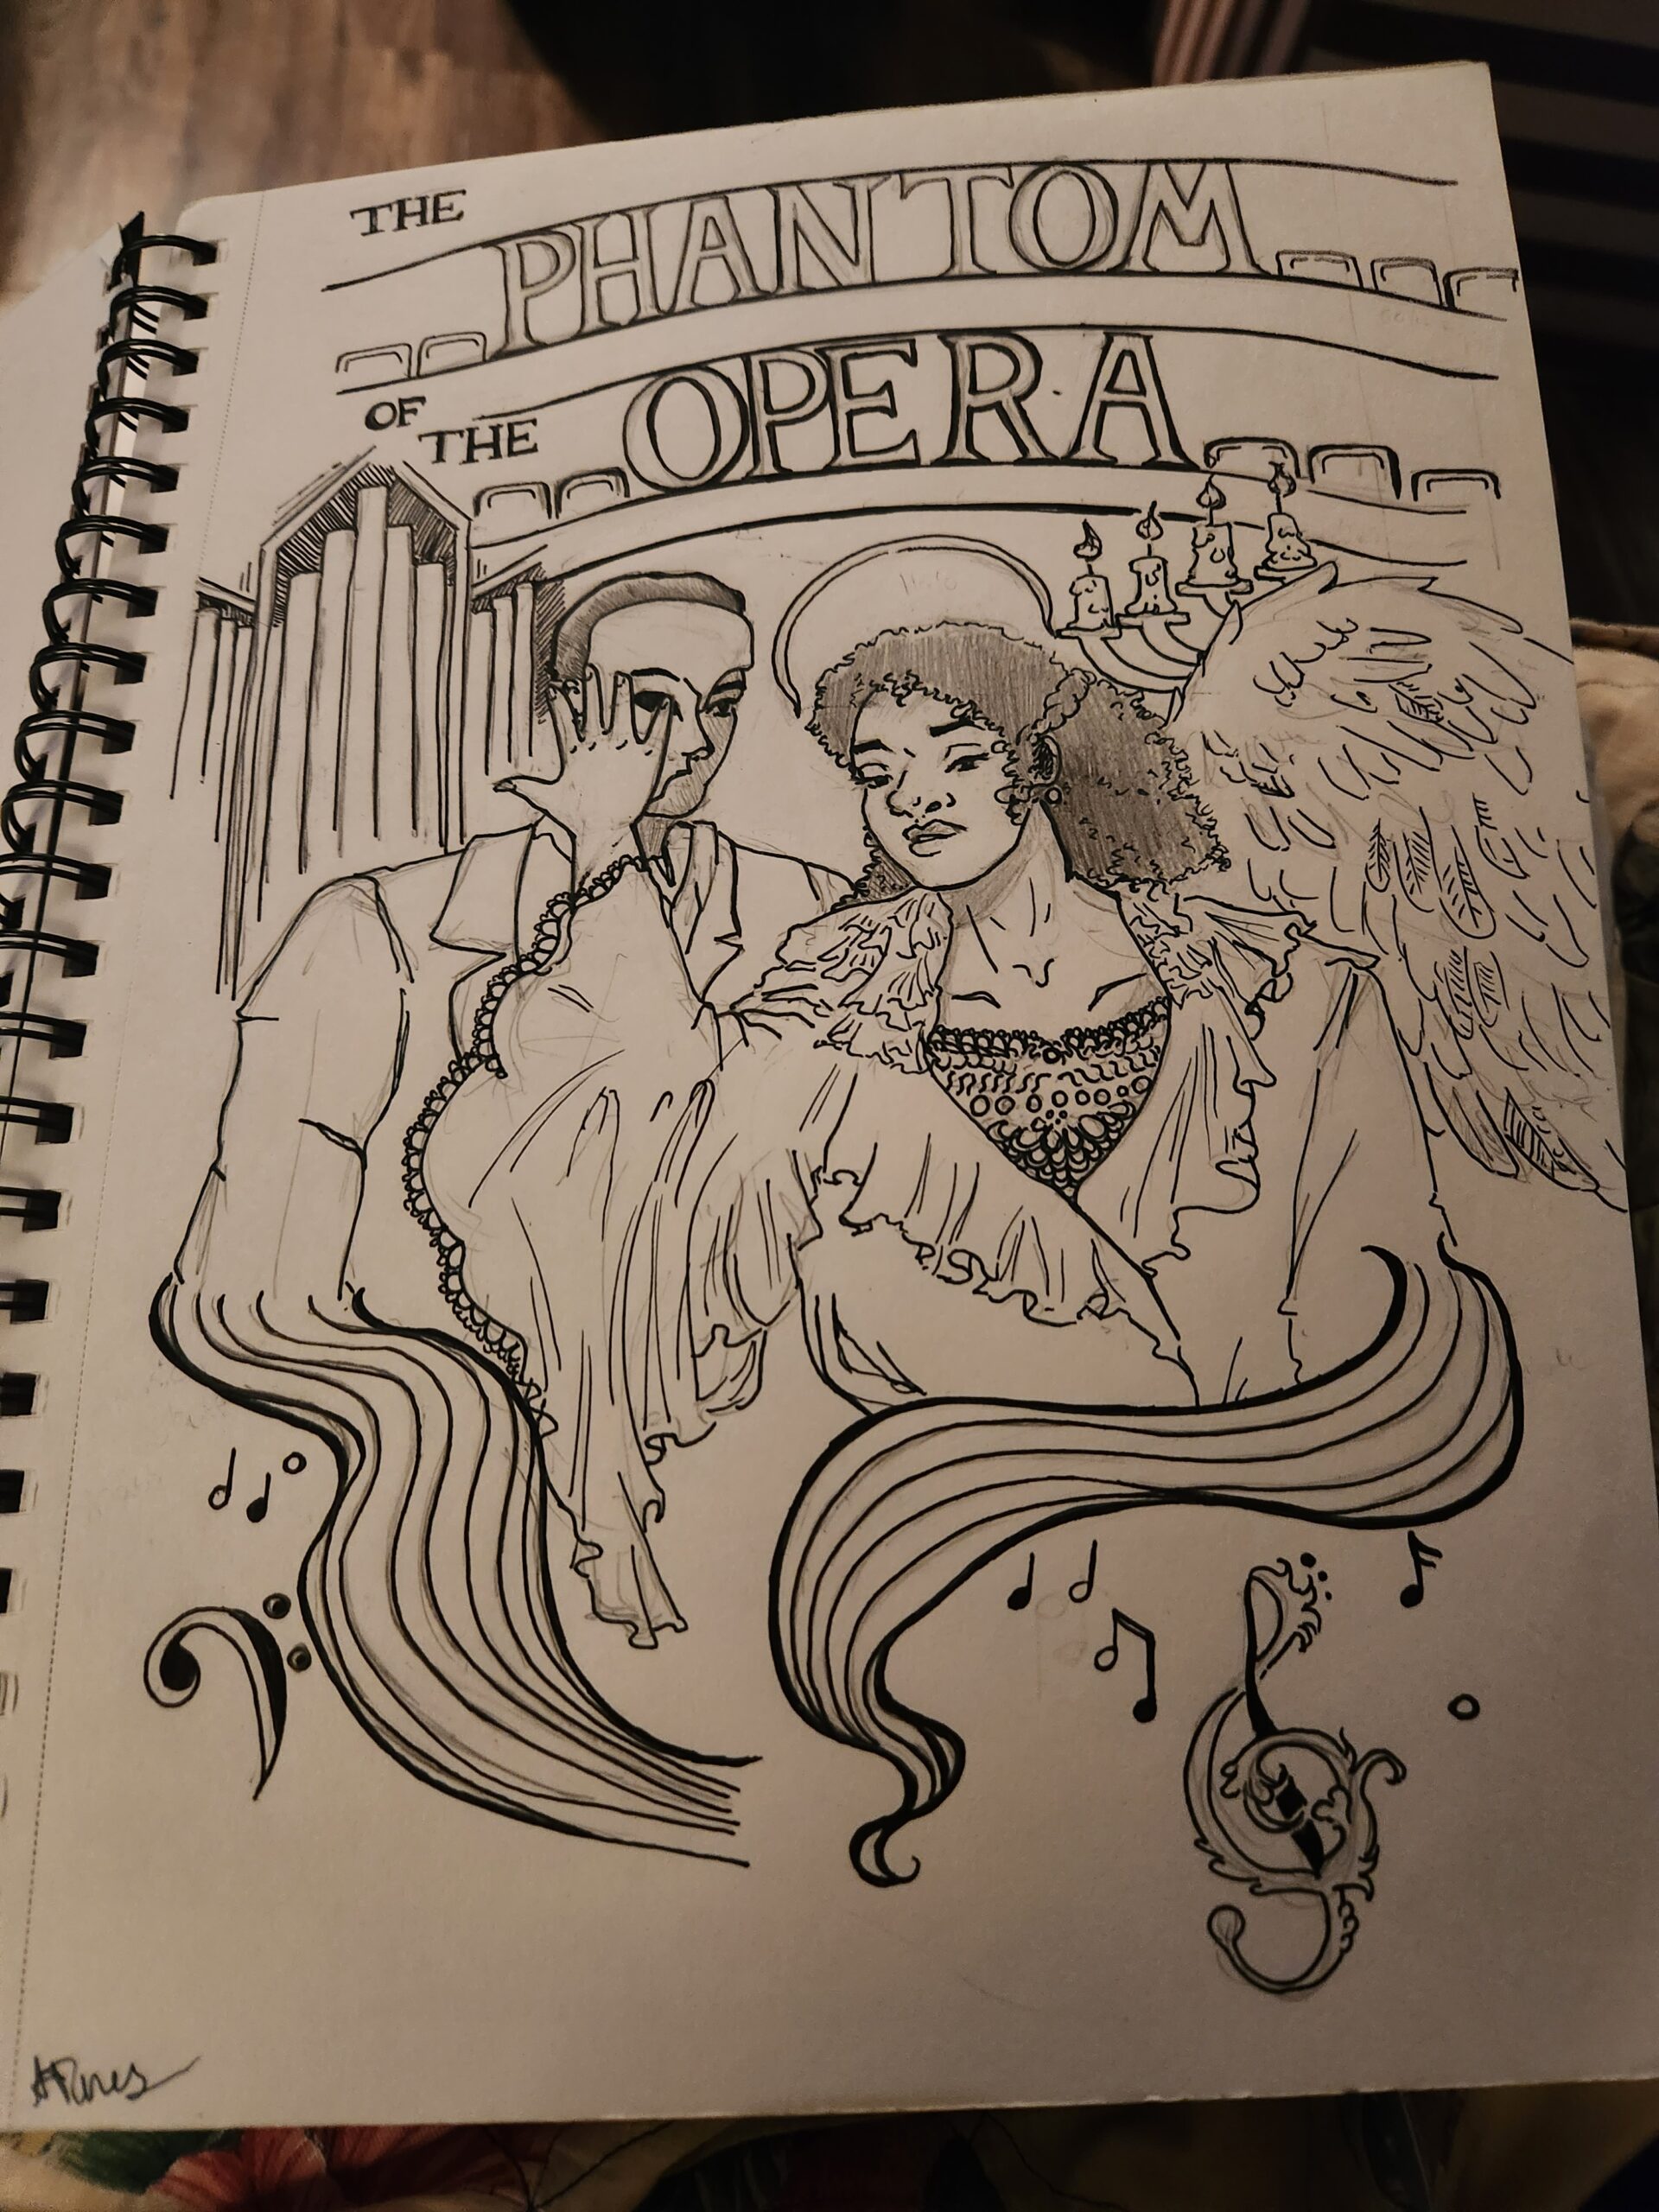 a woman and a man stand, with the woman having thick, curly hair and the man having a mask obscuring half his face. They dissolve into musical staffs stylized, with a pipe organ and seats in the background, music notes at the bottom. Text at the top reads "the phantom of the opera"